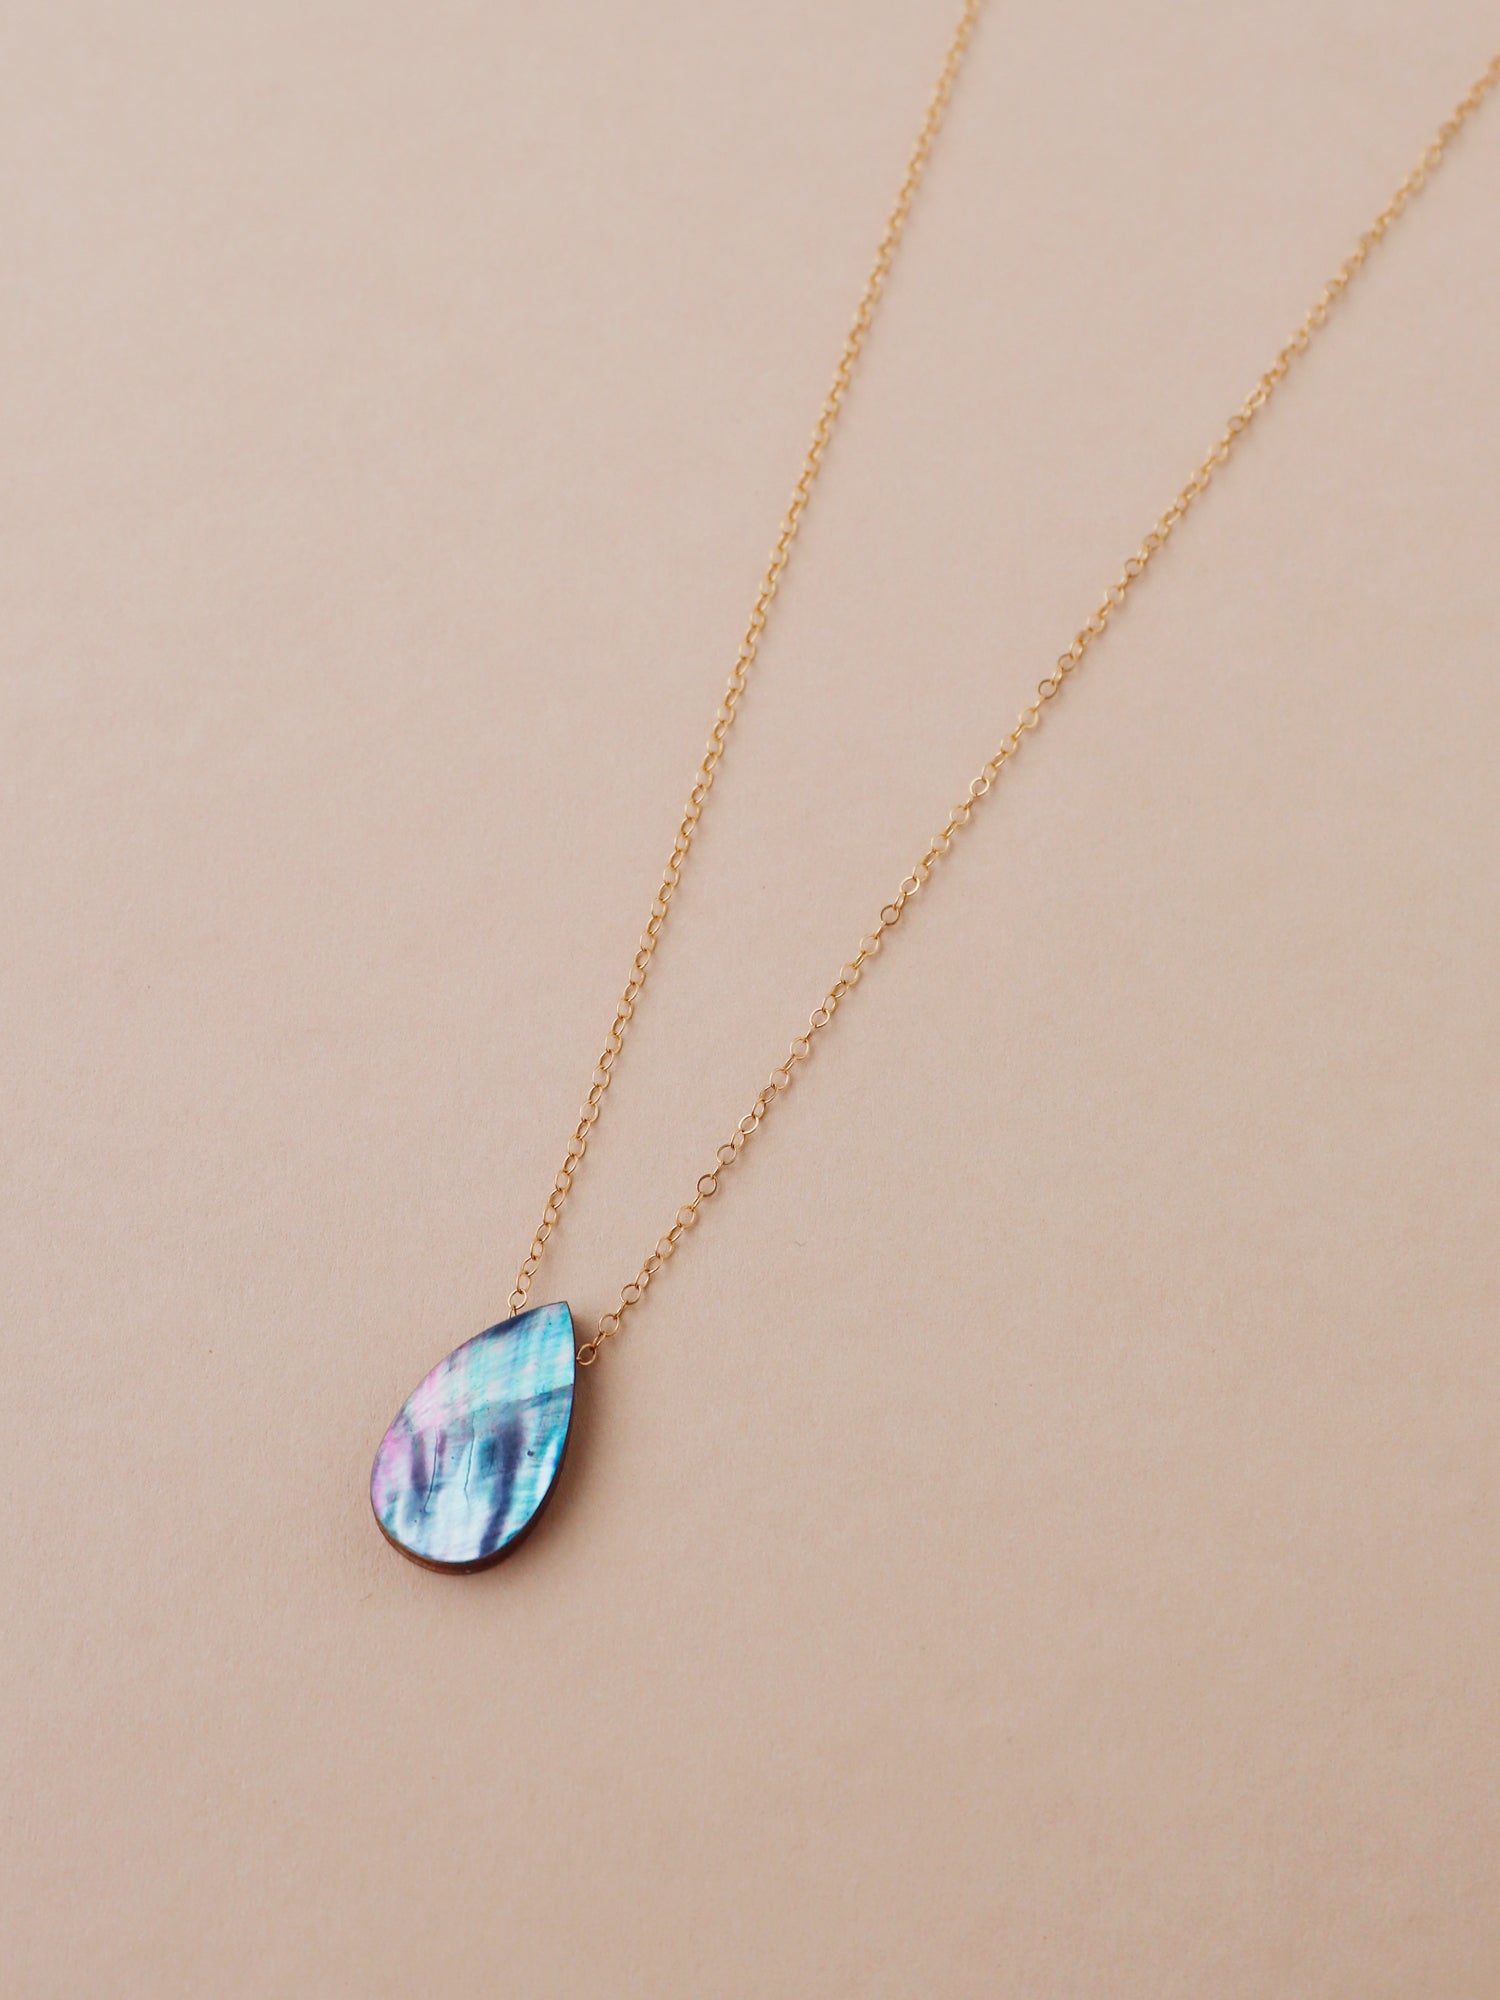 5. Raindrop Necklace in Sea Blue -No Chain/Pendant Only - Discontinued